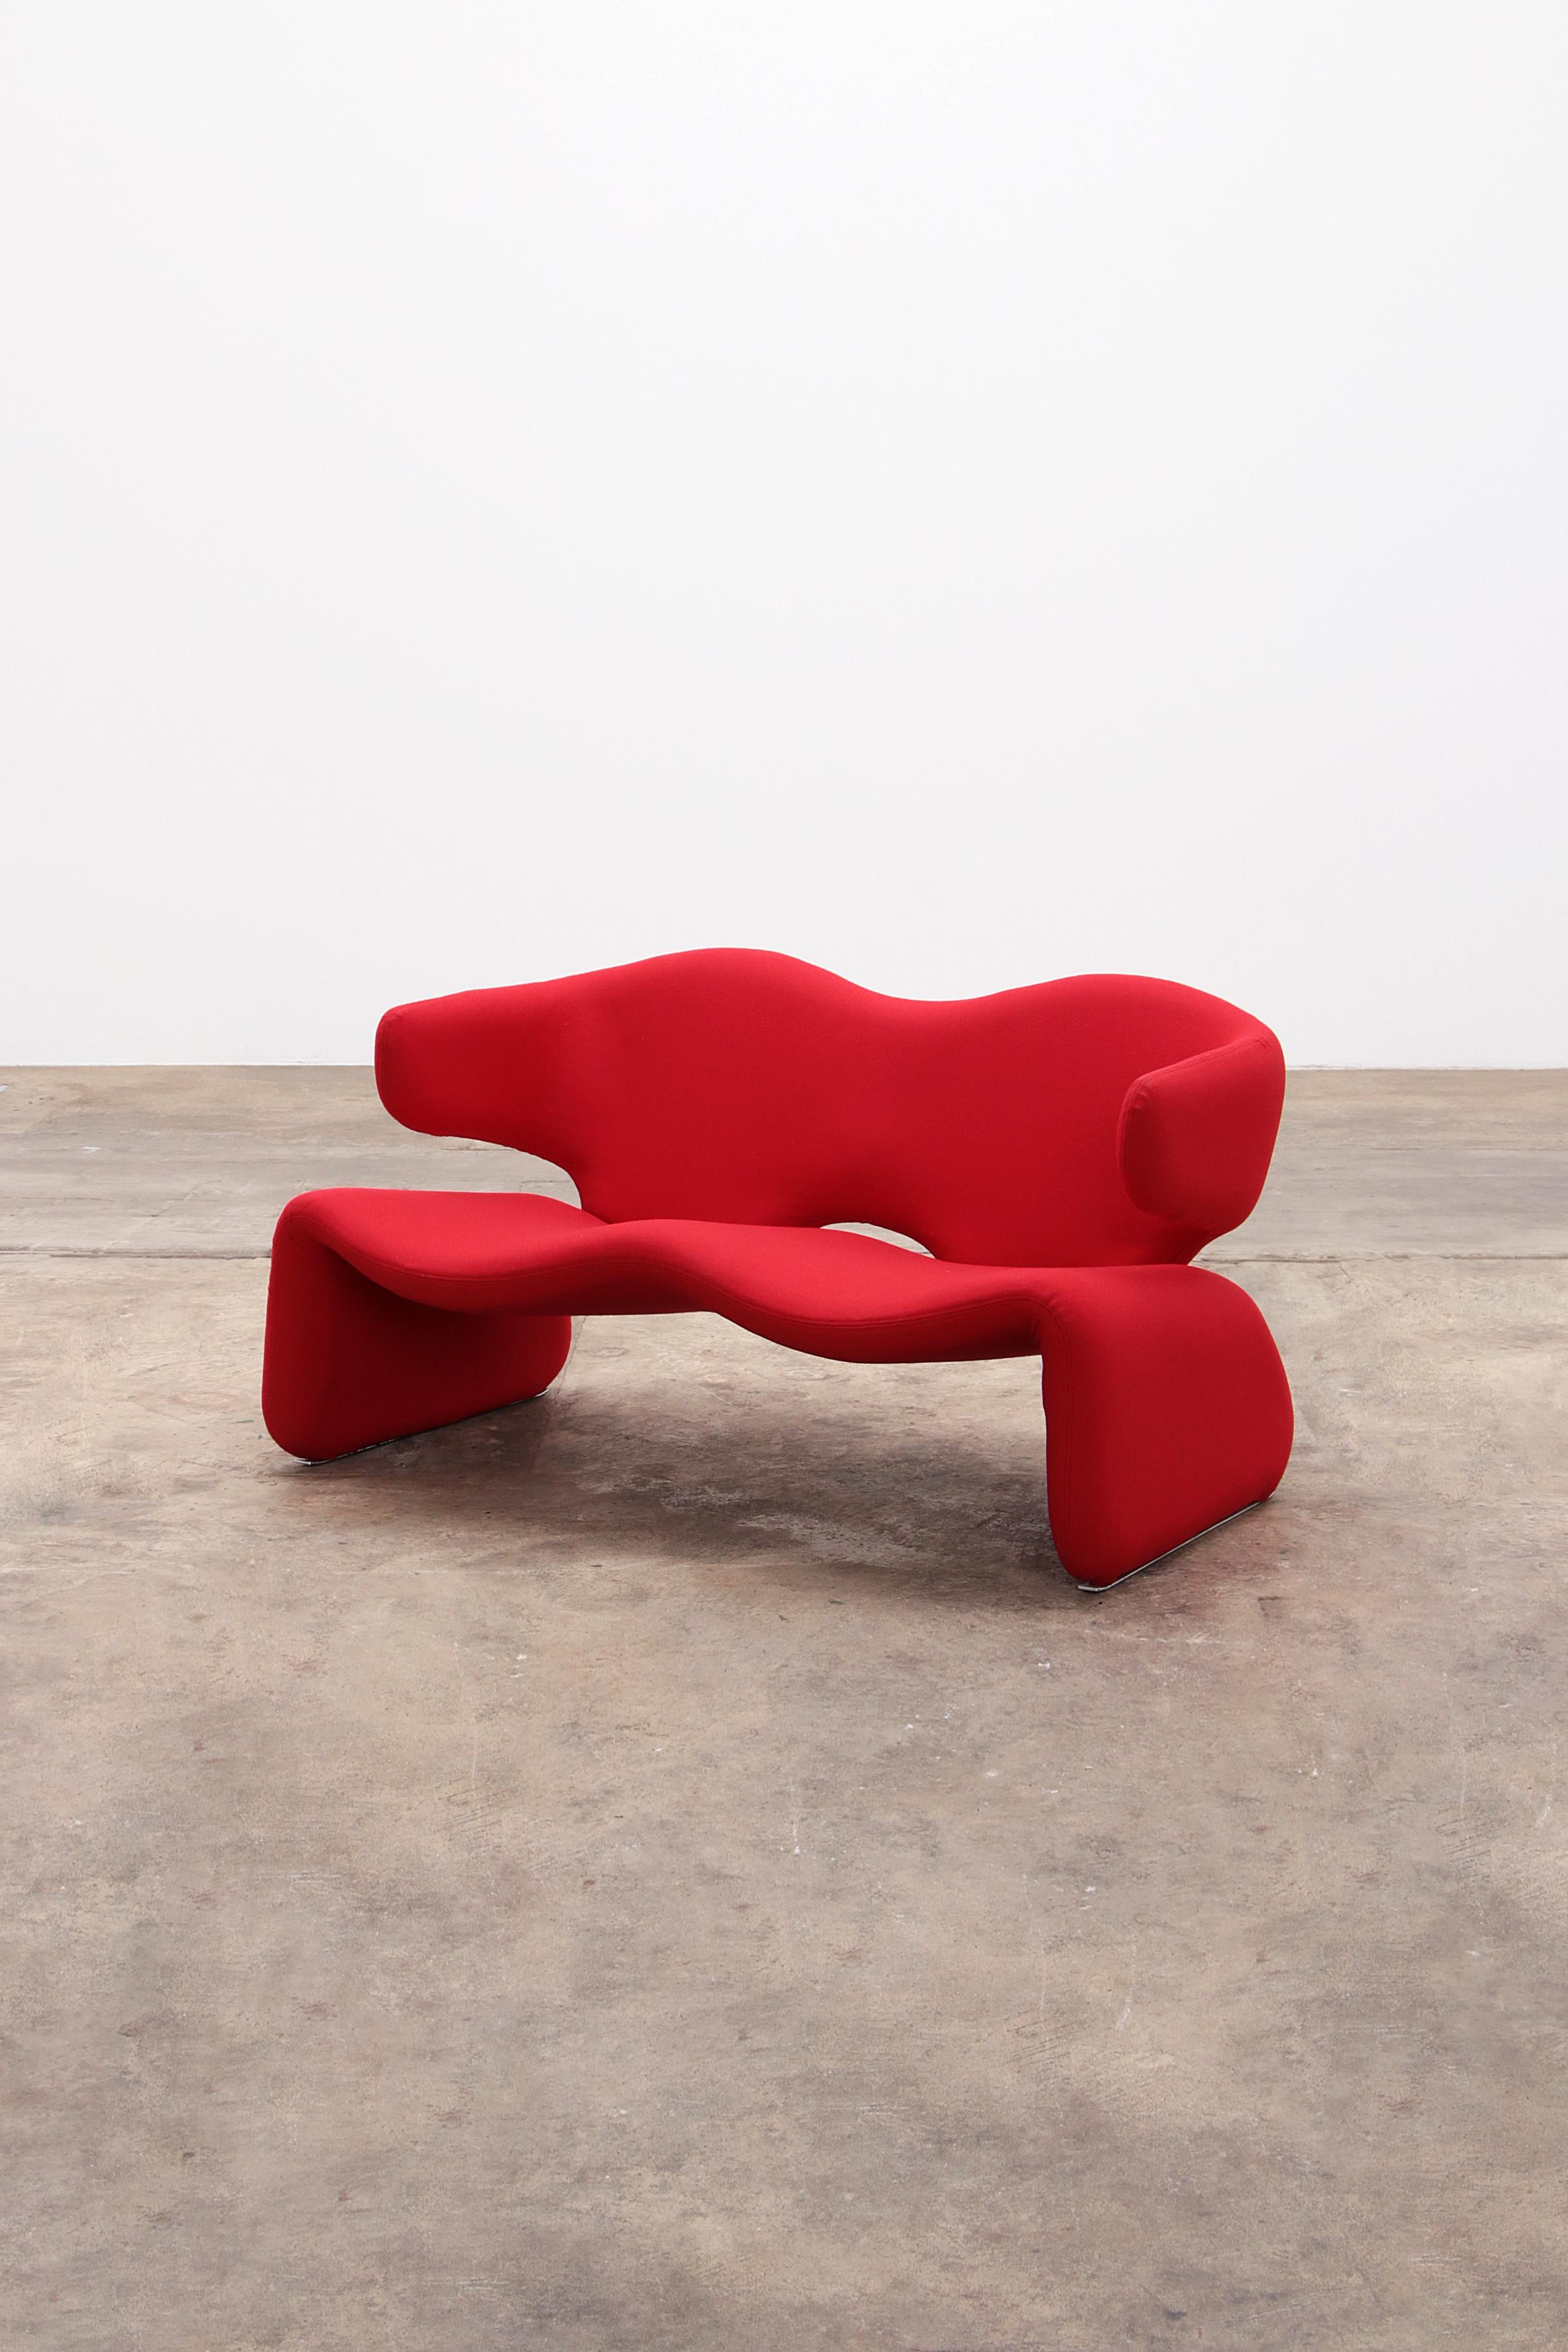 Two-seater Djinn Sofa by Oliver Mourgue 1960


Discover the timeless beauty of the Vintage Two-Seater 